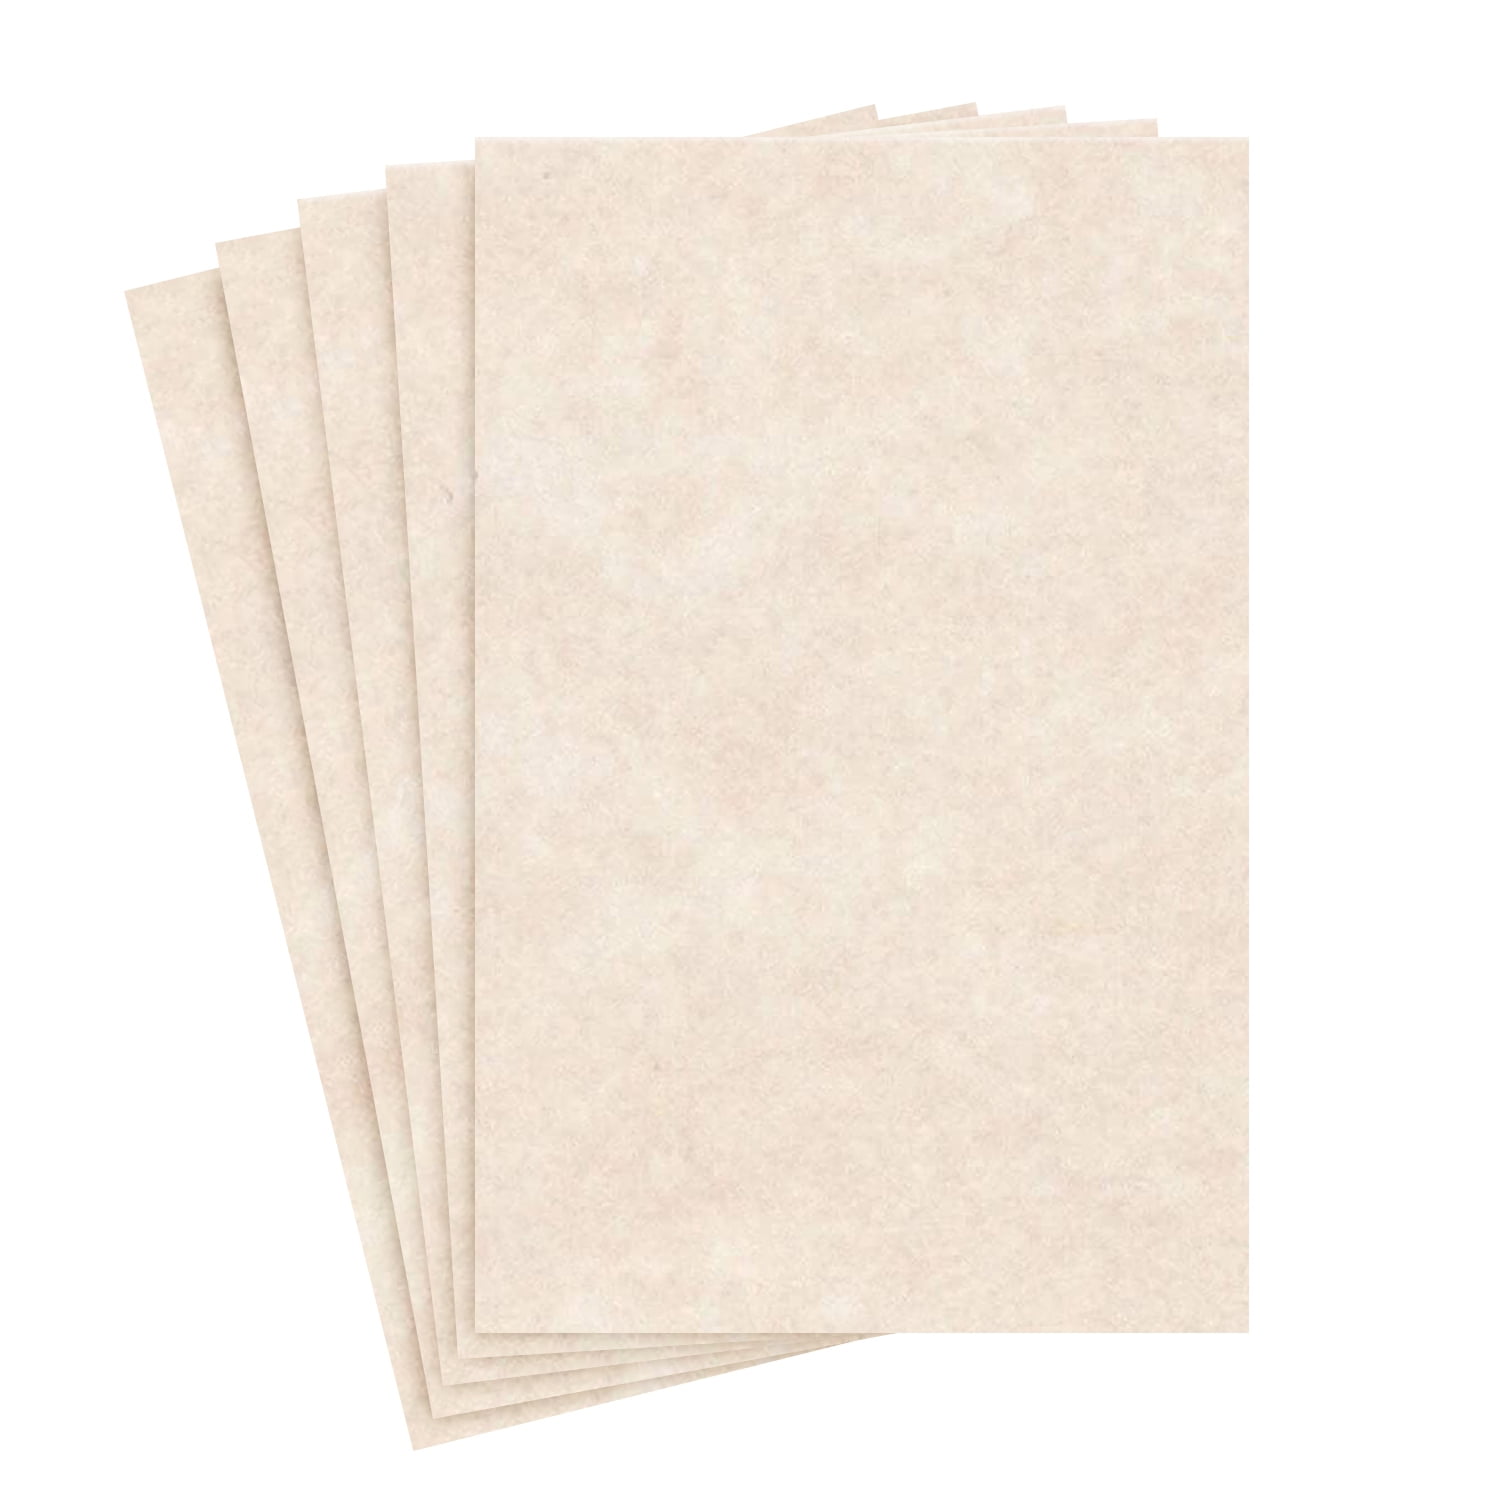 Aged 50 Sheets Per Pack Size 8.5 X 11 Inches Parchment Paper Text 24lb